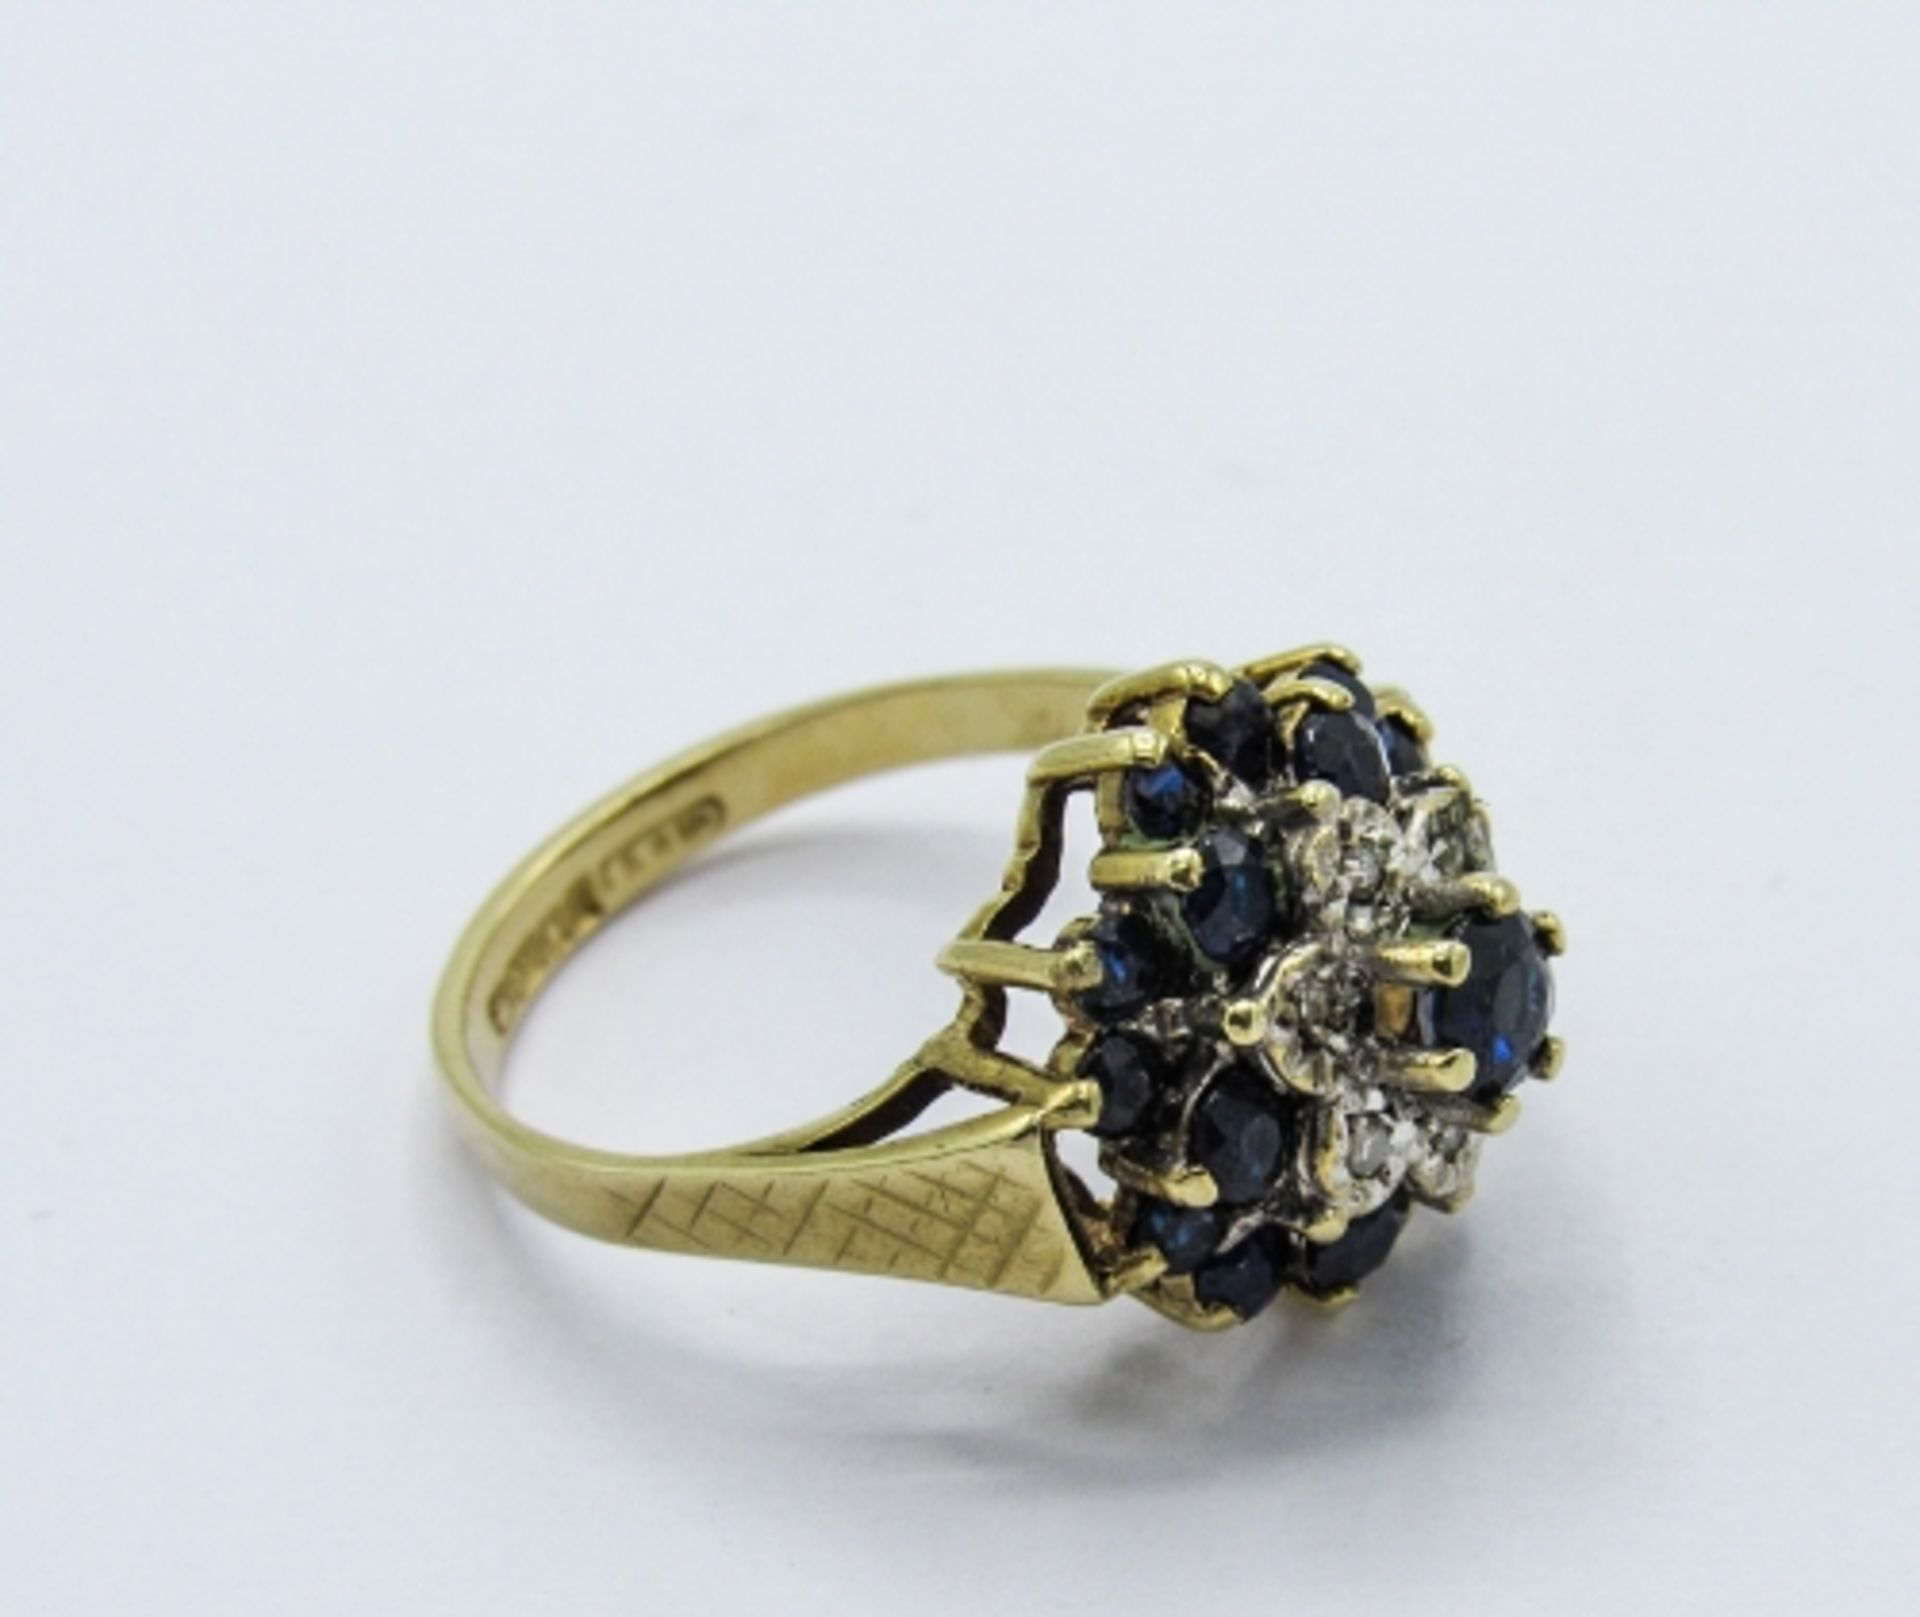 9ct gold sapphire & diamond ring, weight 3.7gms, size M. Estimate £130-150 - Image 3 of 4